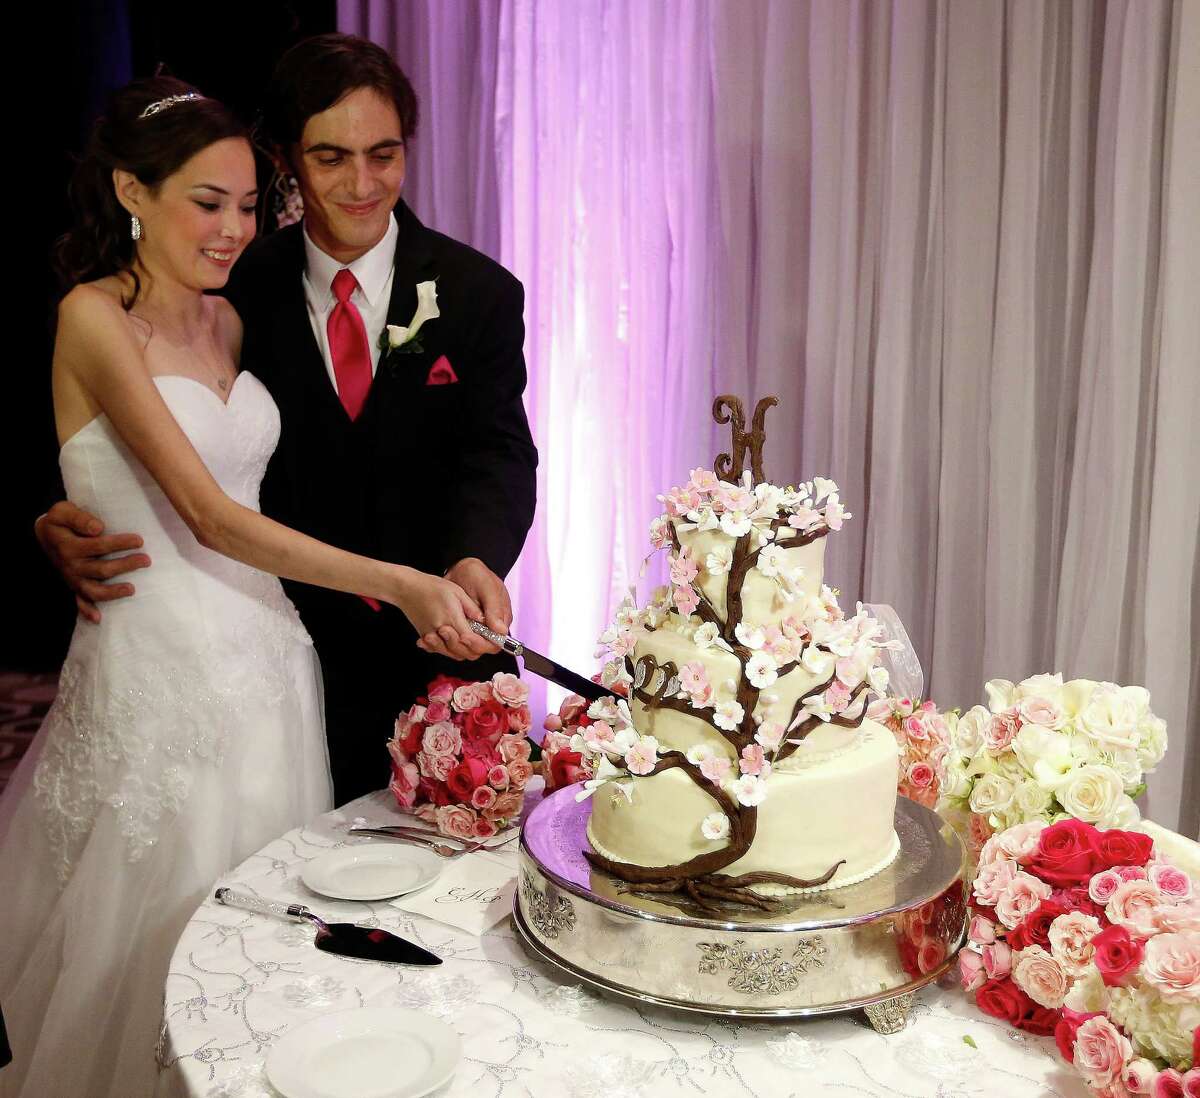 Catherine and Peter cut their cake during the reception for their "Wish Upon a Wedding" wedding at Hotel Derek on Tuesday, Sept. 8, 2015. Catherine and Peter are from McAllen. Catherine suffers from cystic fibrosis and is currently awaiting a double-lung transplant that could extend her life. Wish Upon a Wedding is a non-profit that utilizes high end wedding planners and photographers to give their talents to make dreams come true for couples facing life threatening ordeals to be able to find hope. ( Karen Warren / Houston Chronicle )